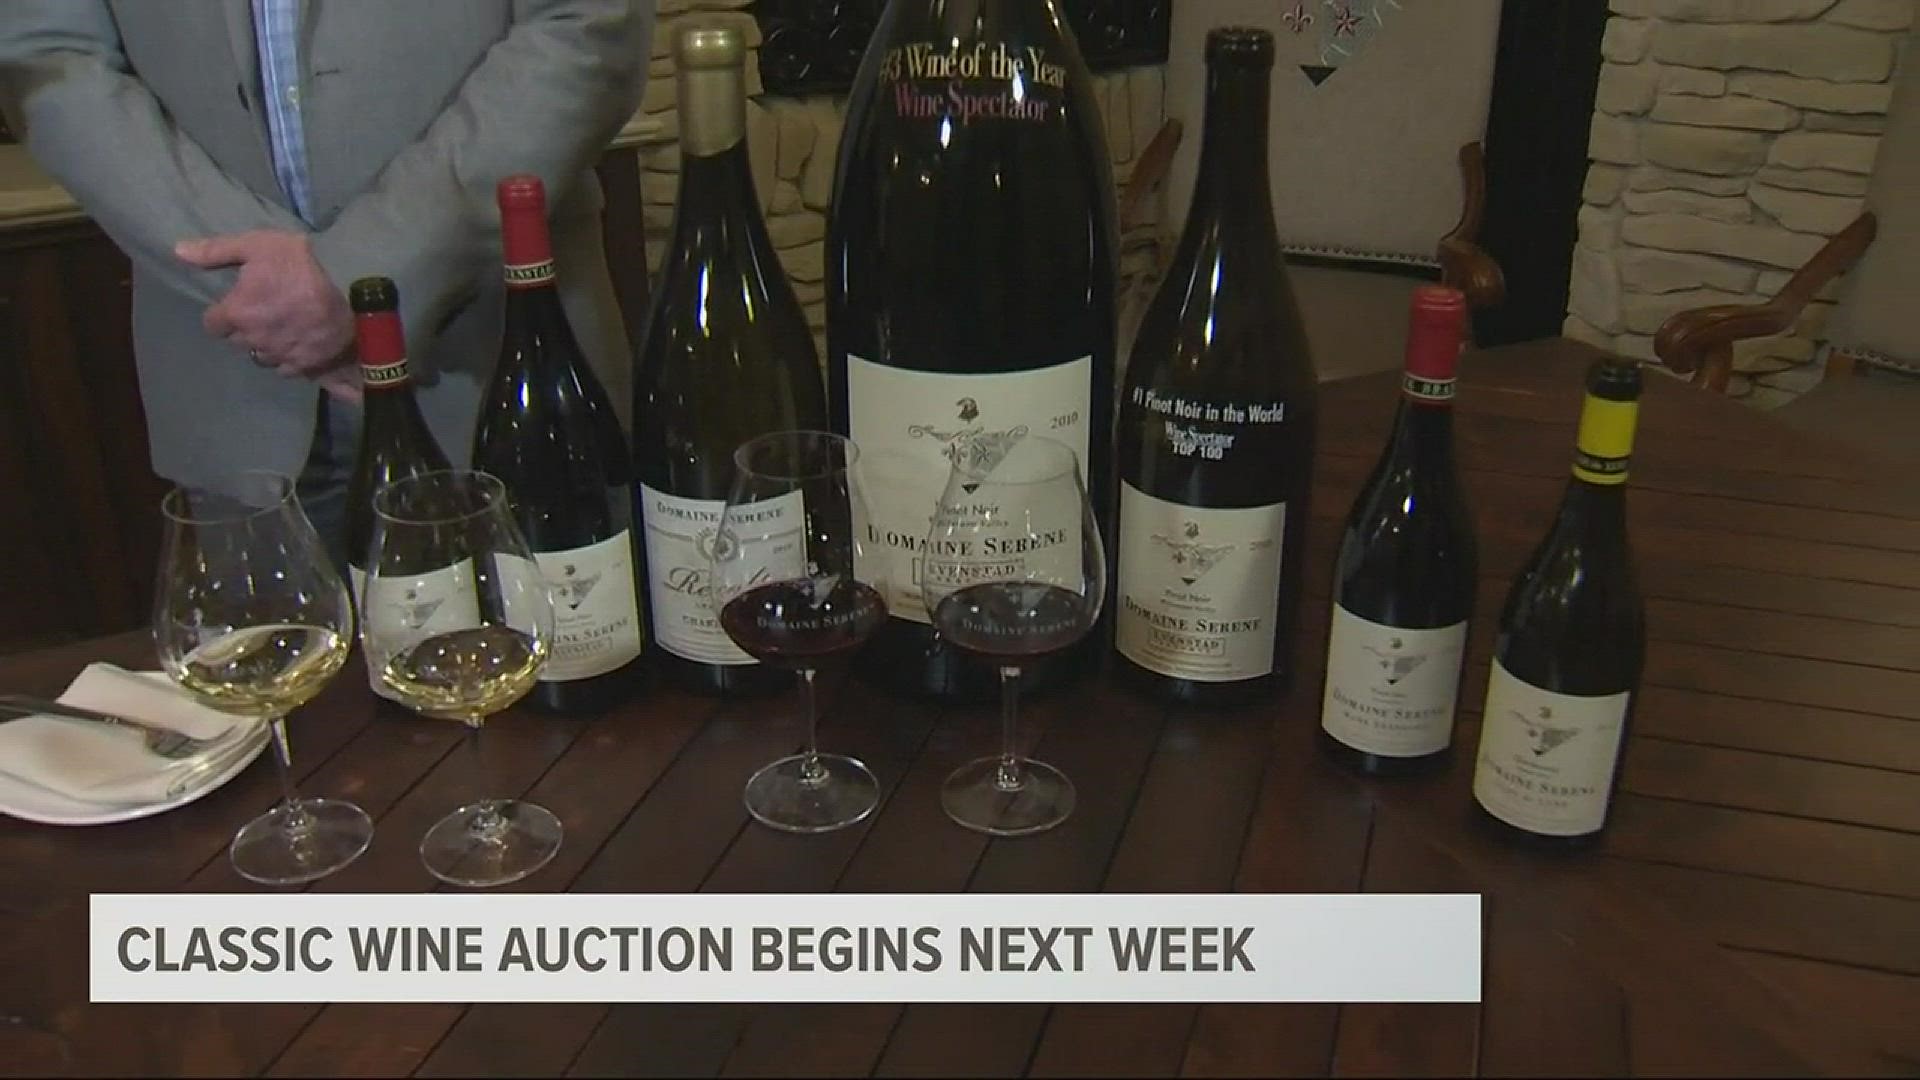 The classic wine auction starts next week.